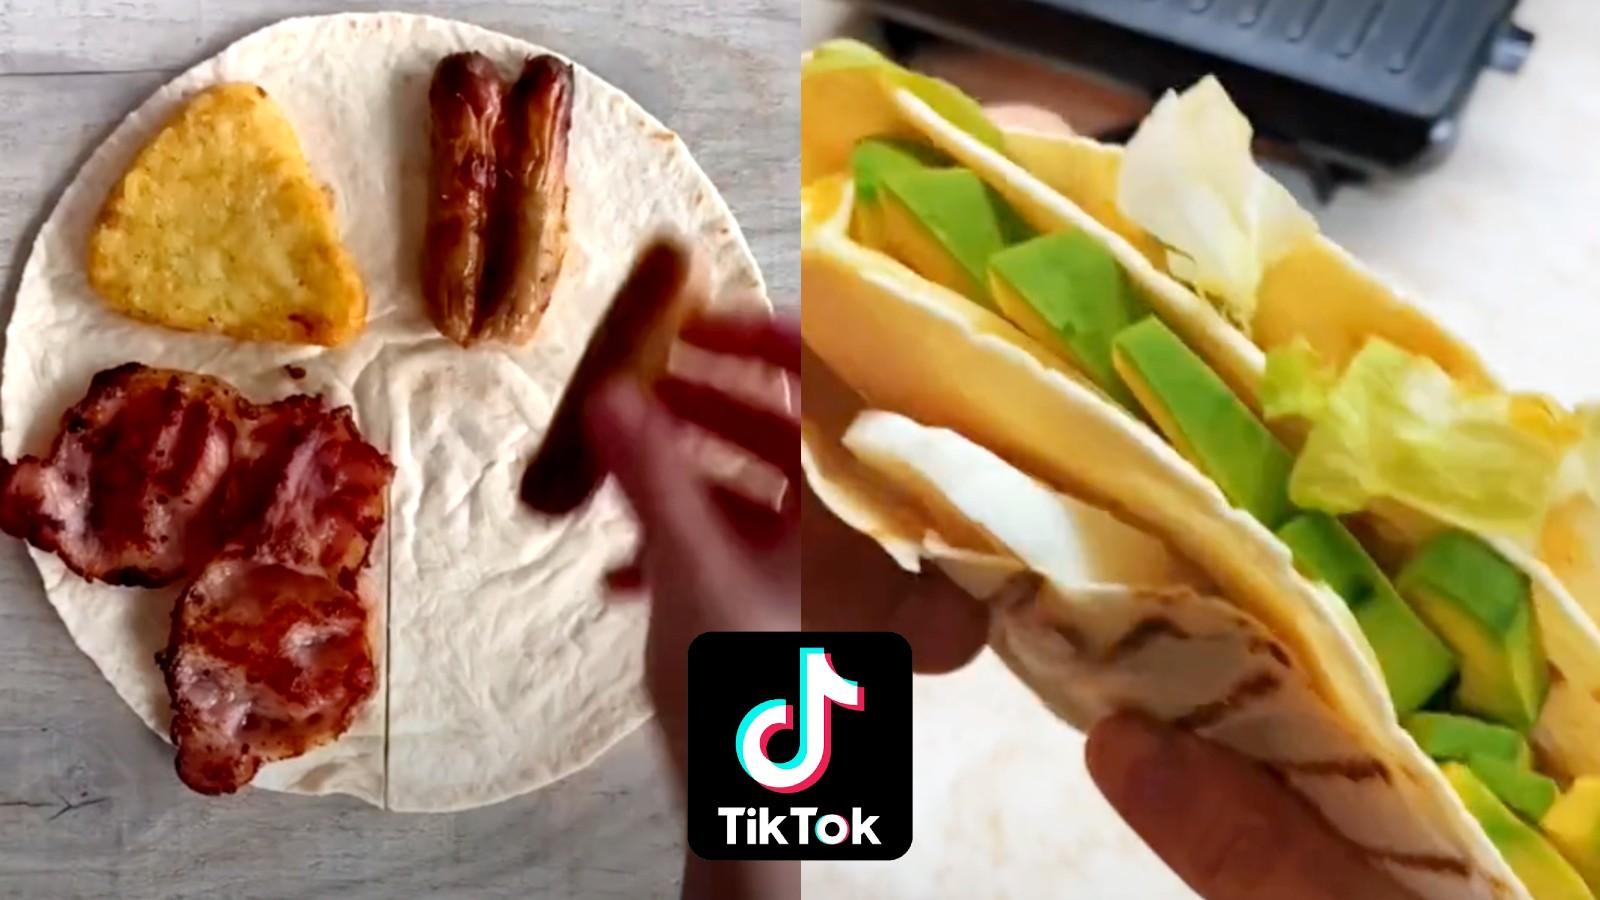 Tortilla unfolded and folded next to each other with the TikTok logo